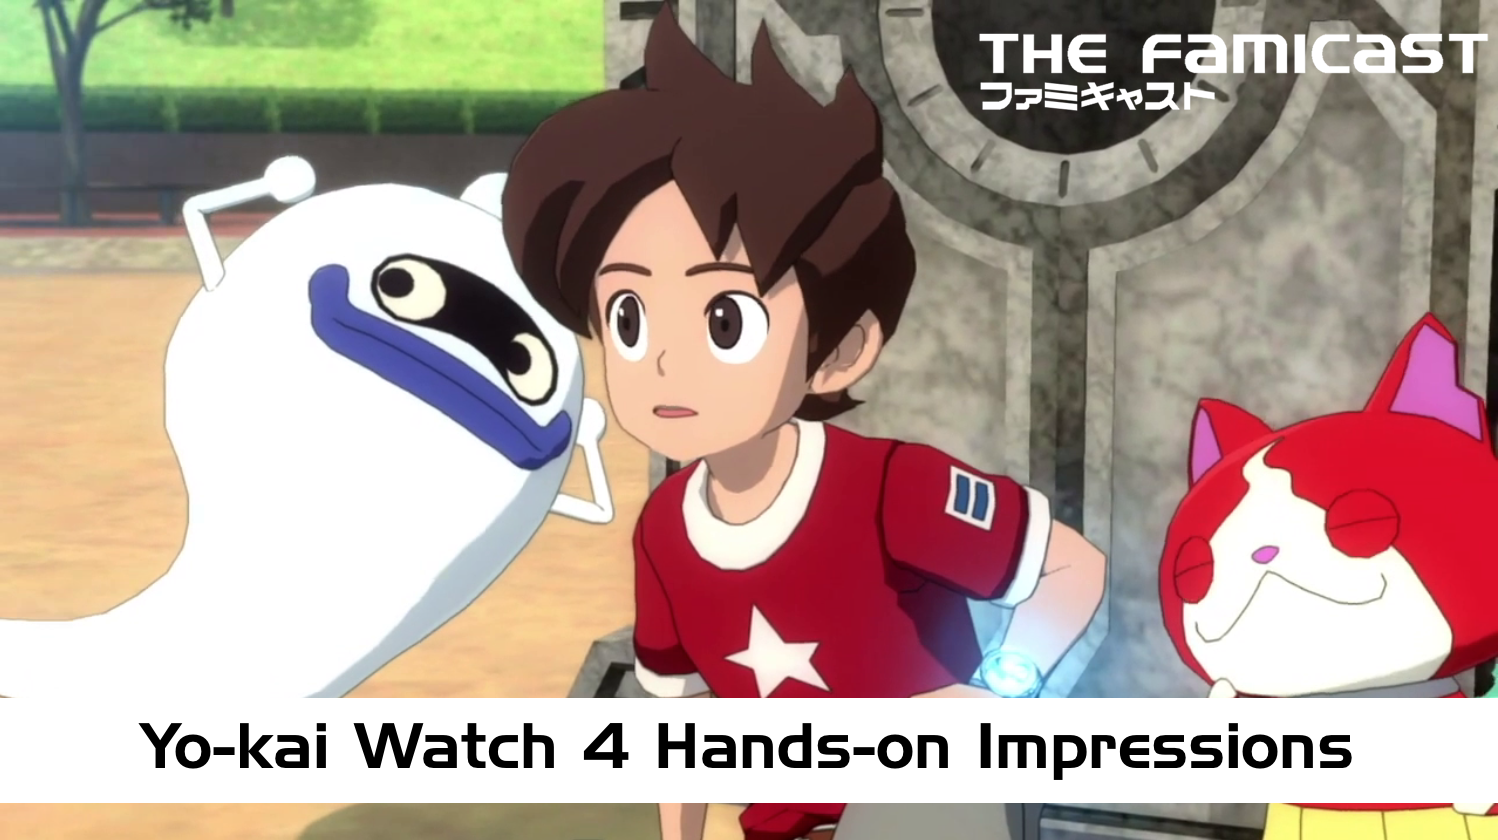 Yo-kai Watch 4 Hands-on Impressions - : Japan-based Nintendo  Podcasts, Videos & Reviews!